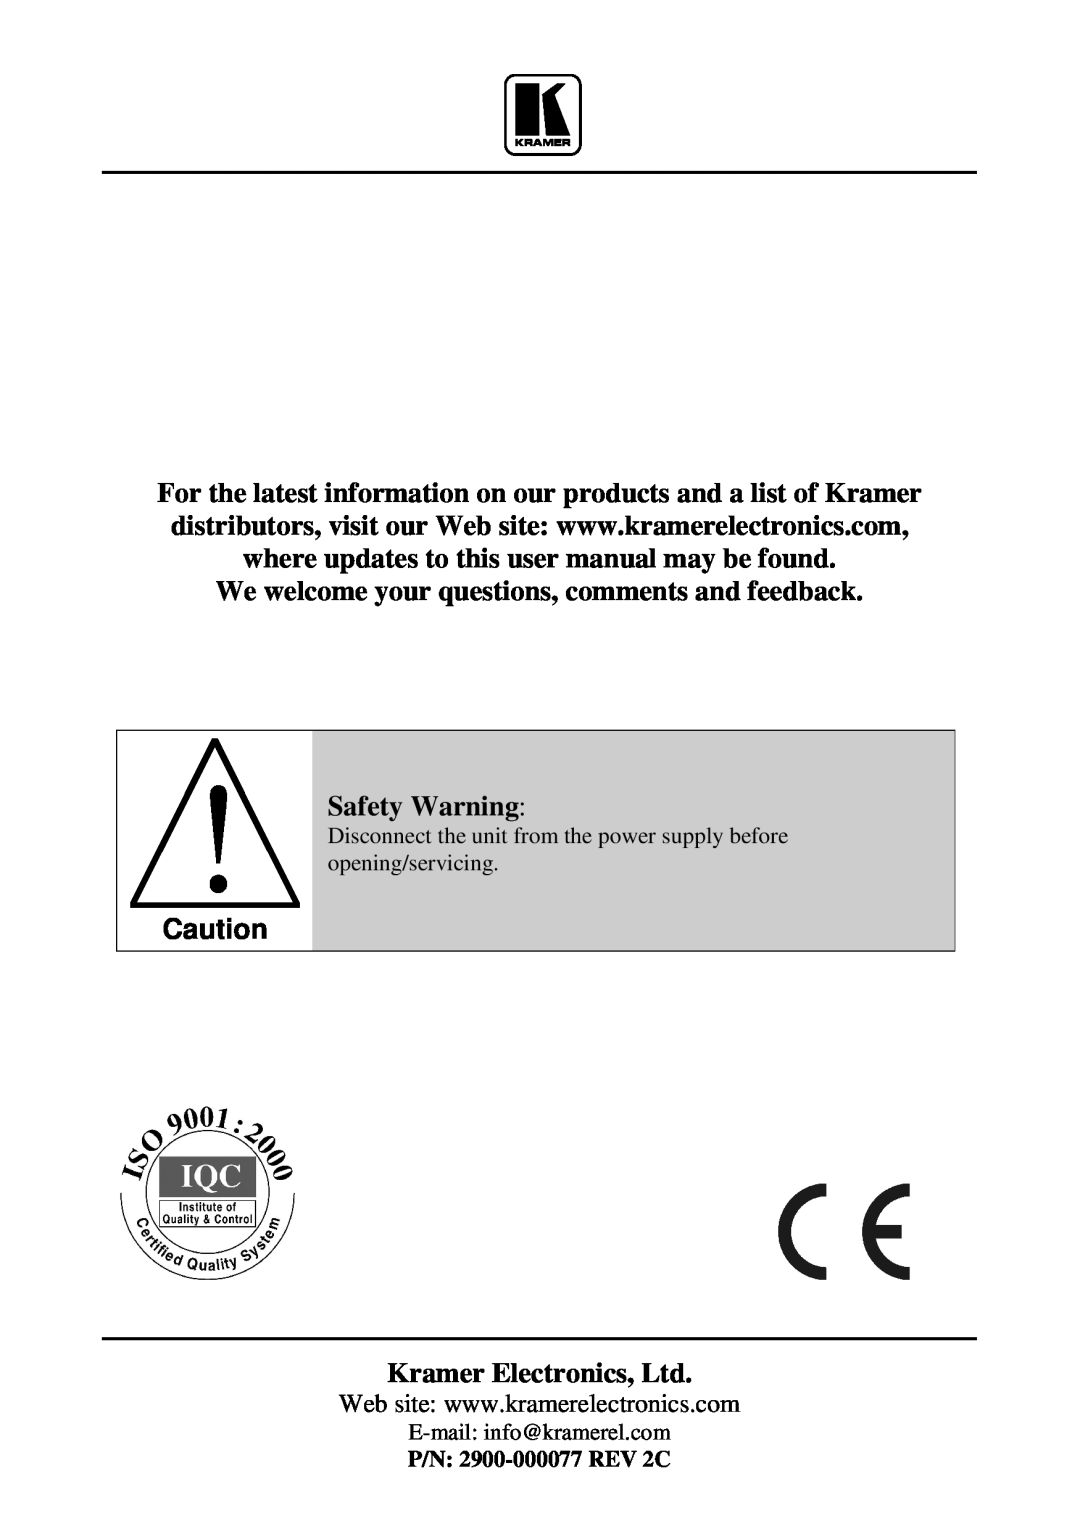 Kramer Electronics FC-4046 user manual We welcome your questions, comments and feedback, Safety Warning 